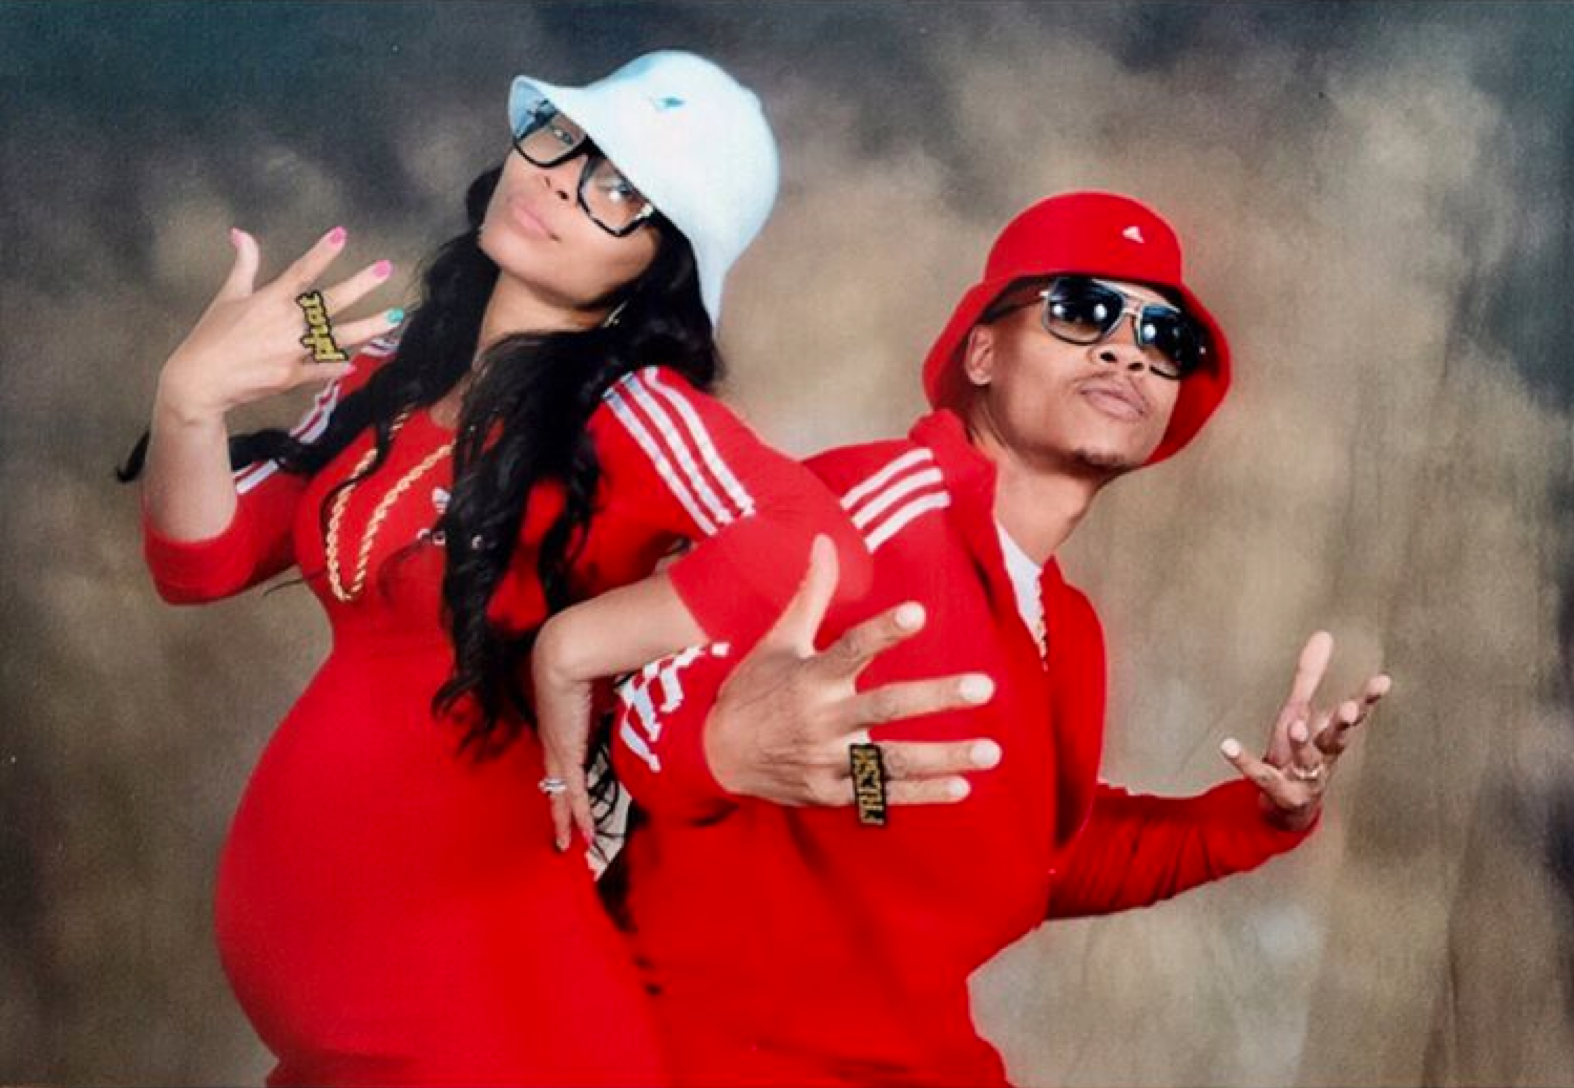 Ronnie Devoe and Wife Announce They Are Expecting Twins in The Cutest Way